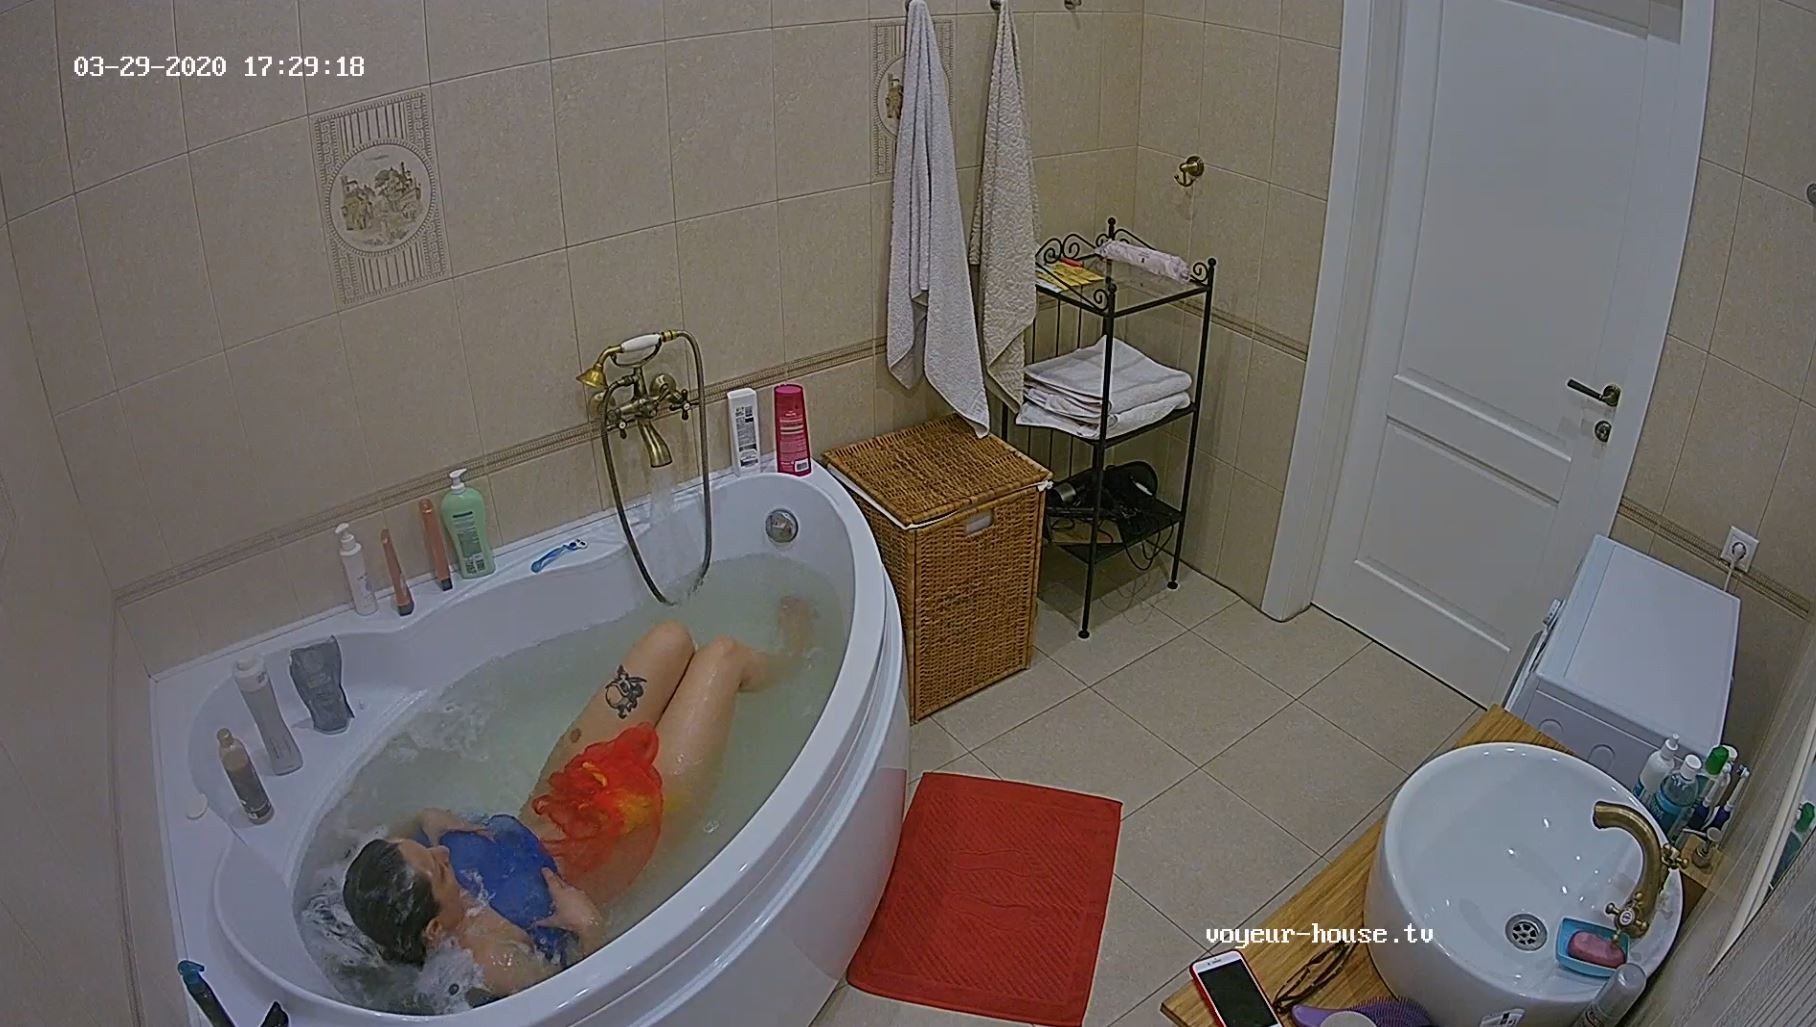 Guest girl taking a weird bath covering herself with some fabric, Mar29/20